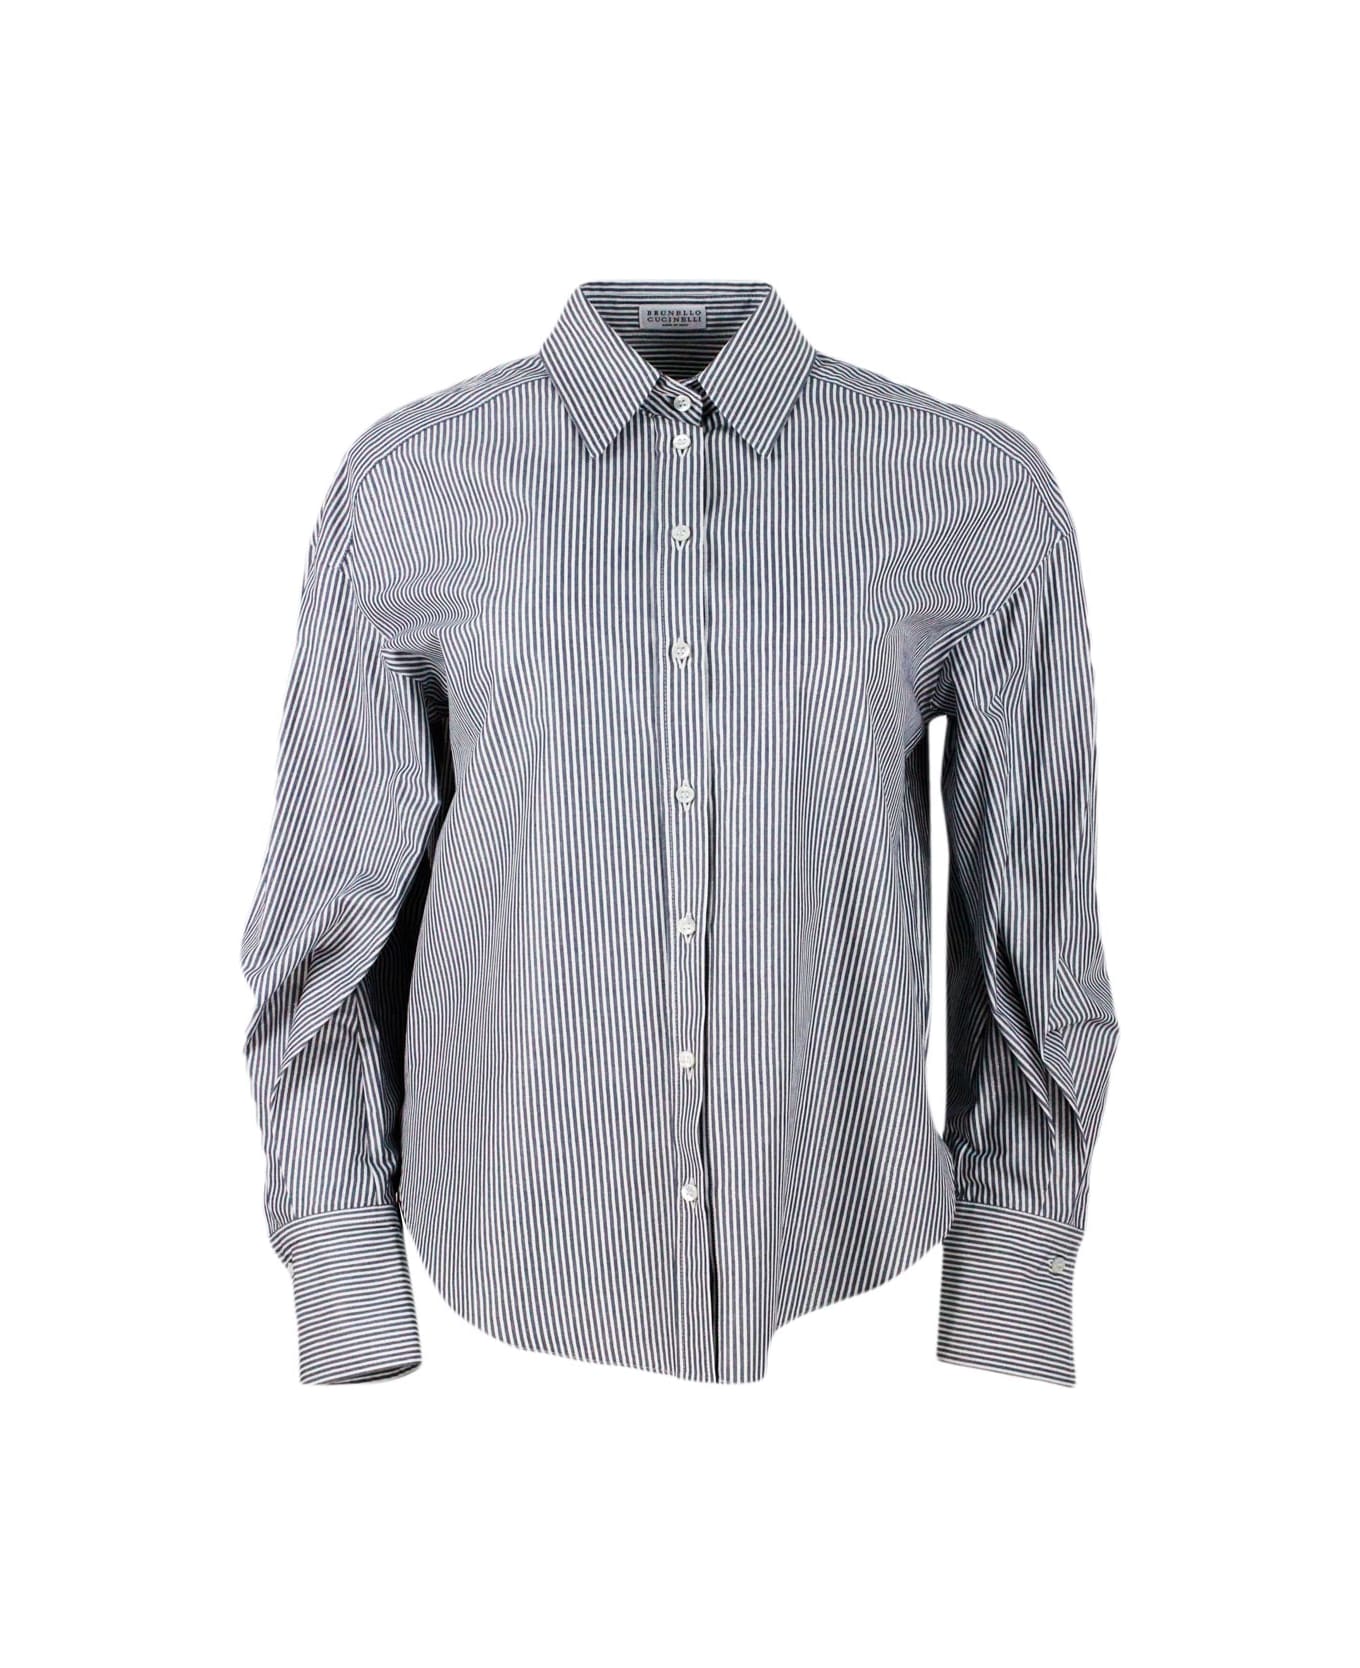 Brunello Cucinelli Long-sleeved Shirt Made Of Cotton With A Striped Pattern Embellished With Bright Lurex Threads - Blu シャツ